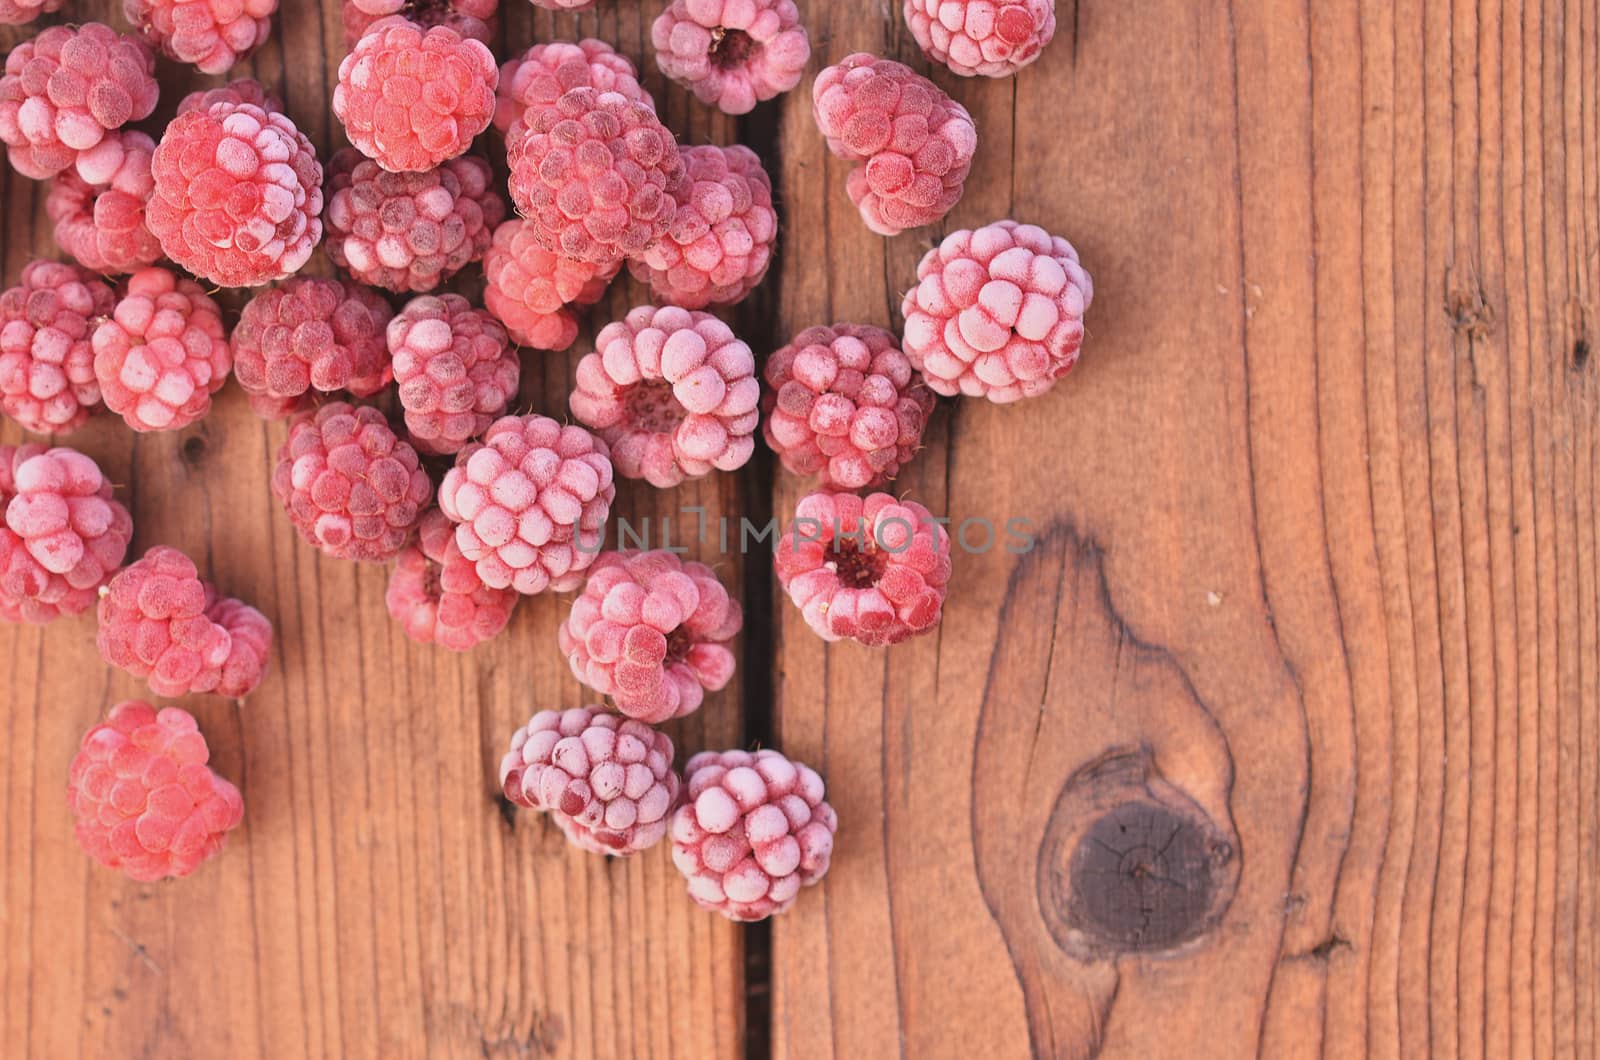 Covered with frozen raspberries, they are lying on the wooden background from the top left